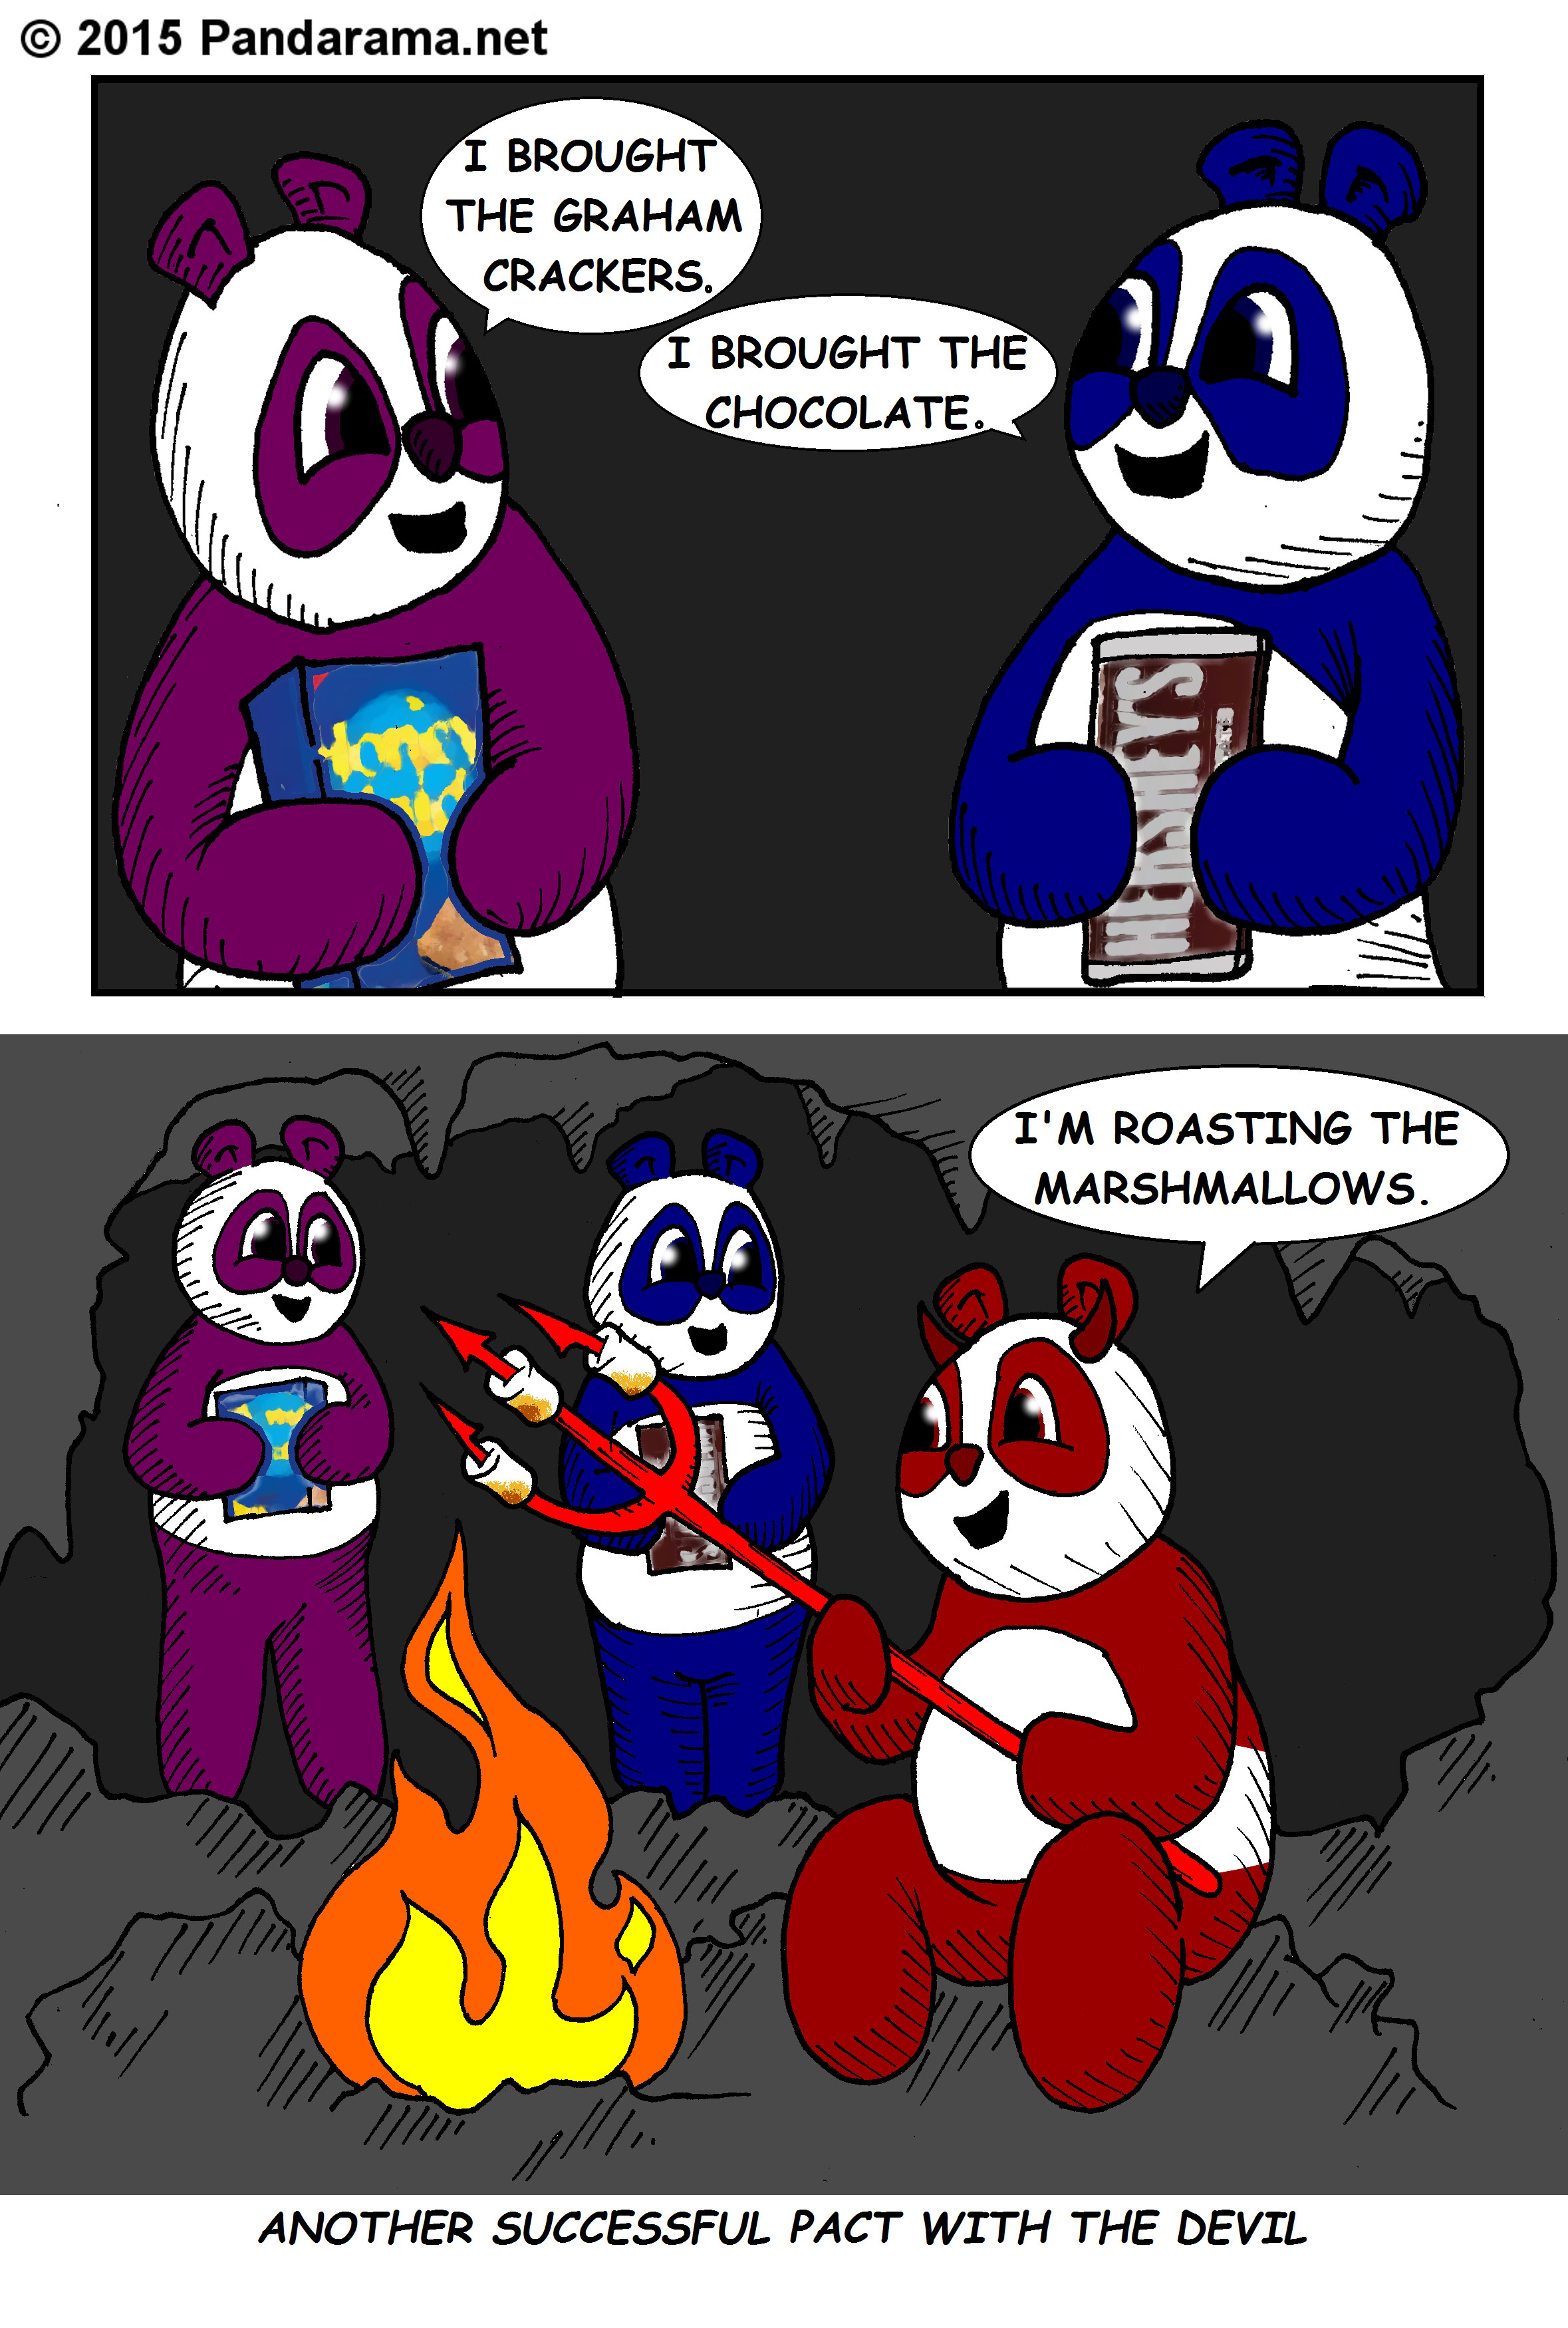 smore cartoon. smores cartoon. s'mores cartoon. cartoons about smores. pact with the devil. how to sell your soul. cartoon where pandas make pact with the devil, one brings chocolate, the other brings graham, and the devil roasts three marshmallows on his pitchfork.